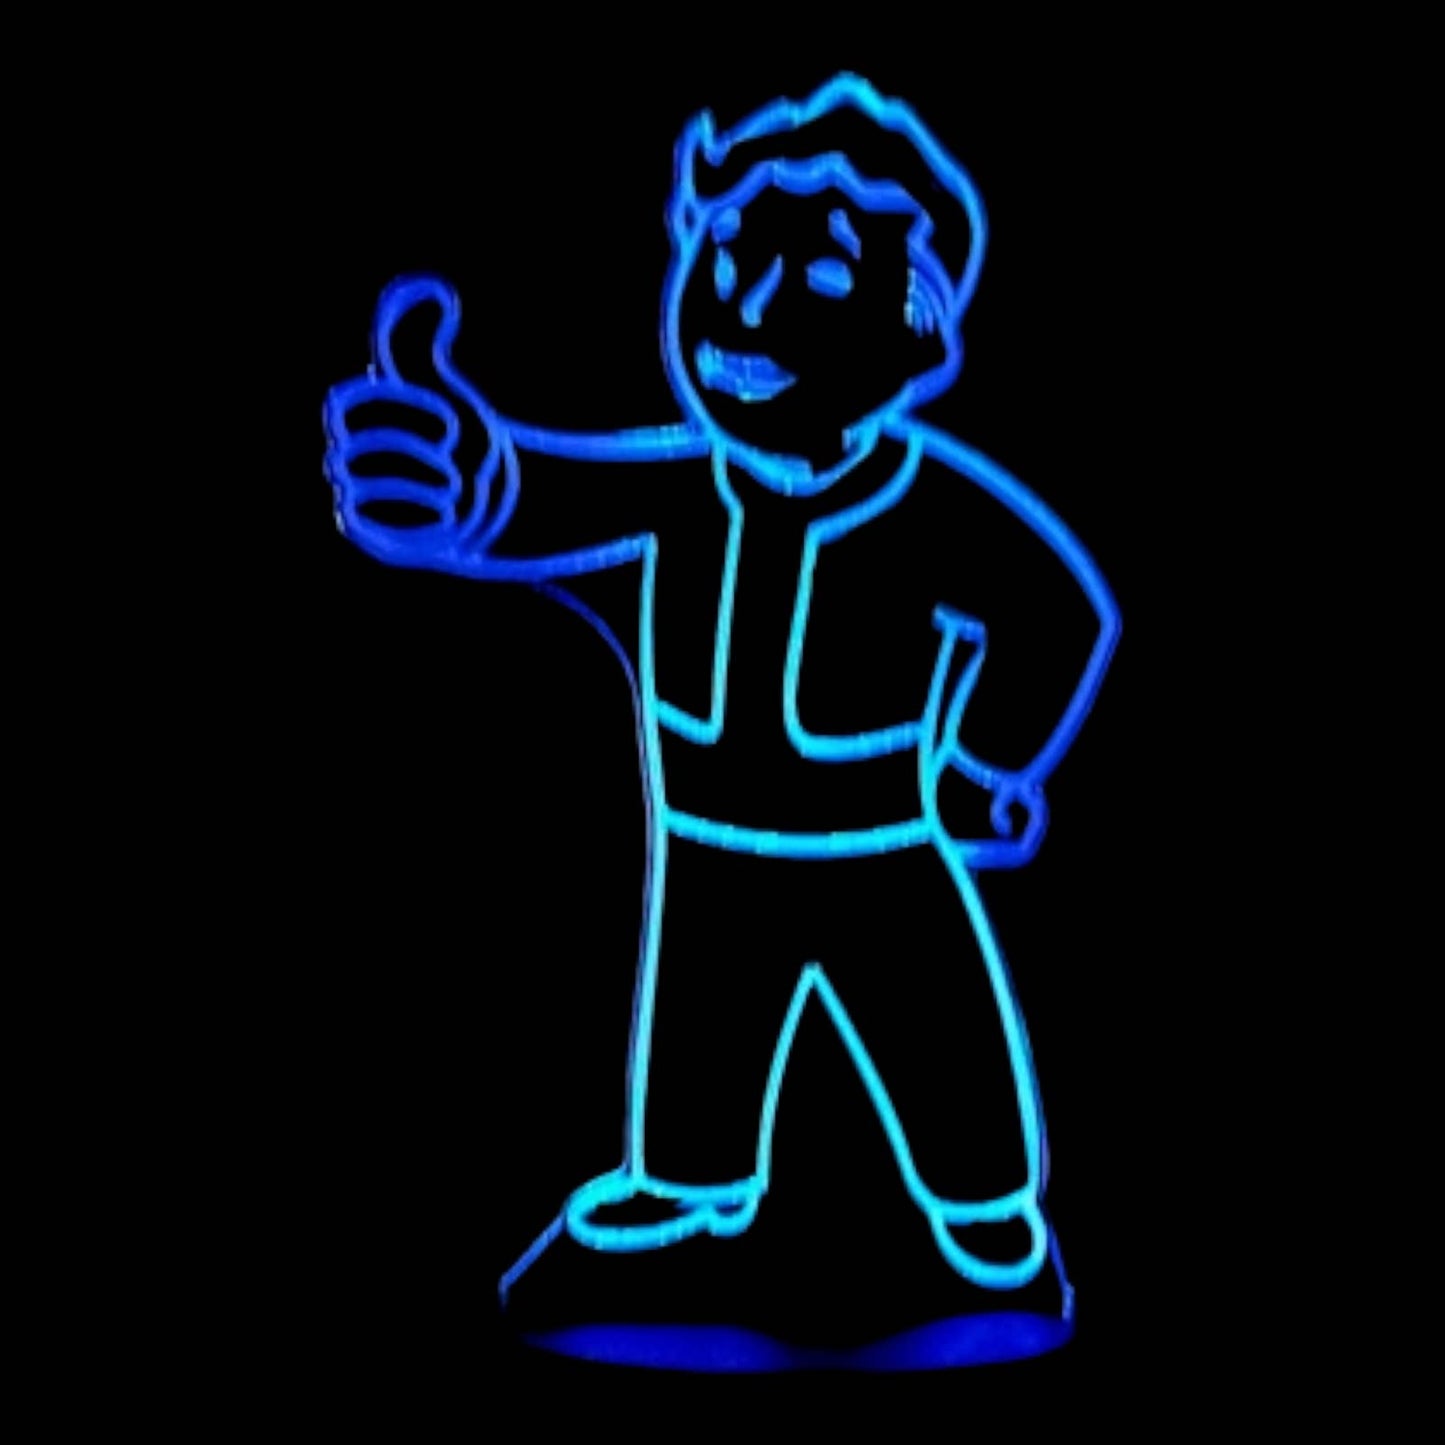 Fallout Pip-Boy 3D LED Night-Light 7 Color Changing Lamp w/ Touch Switch